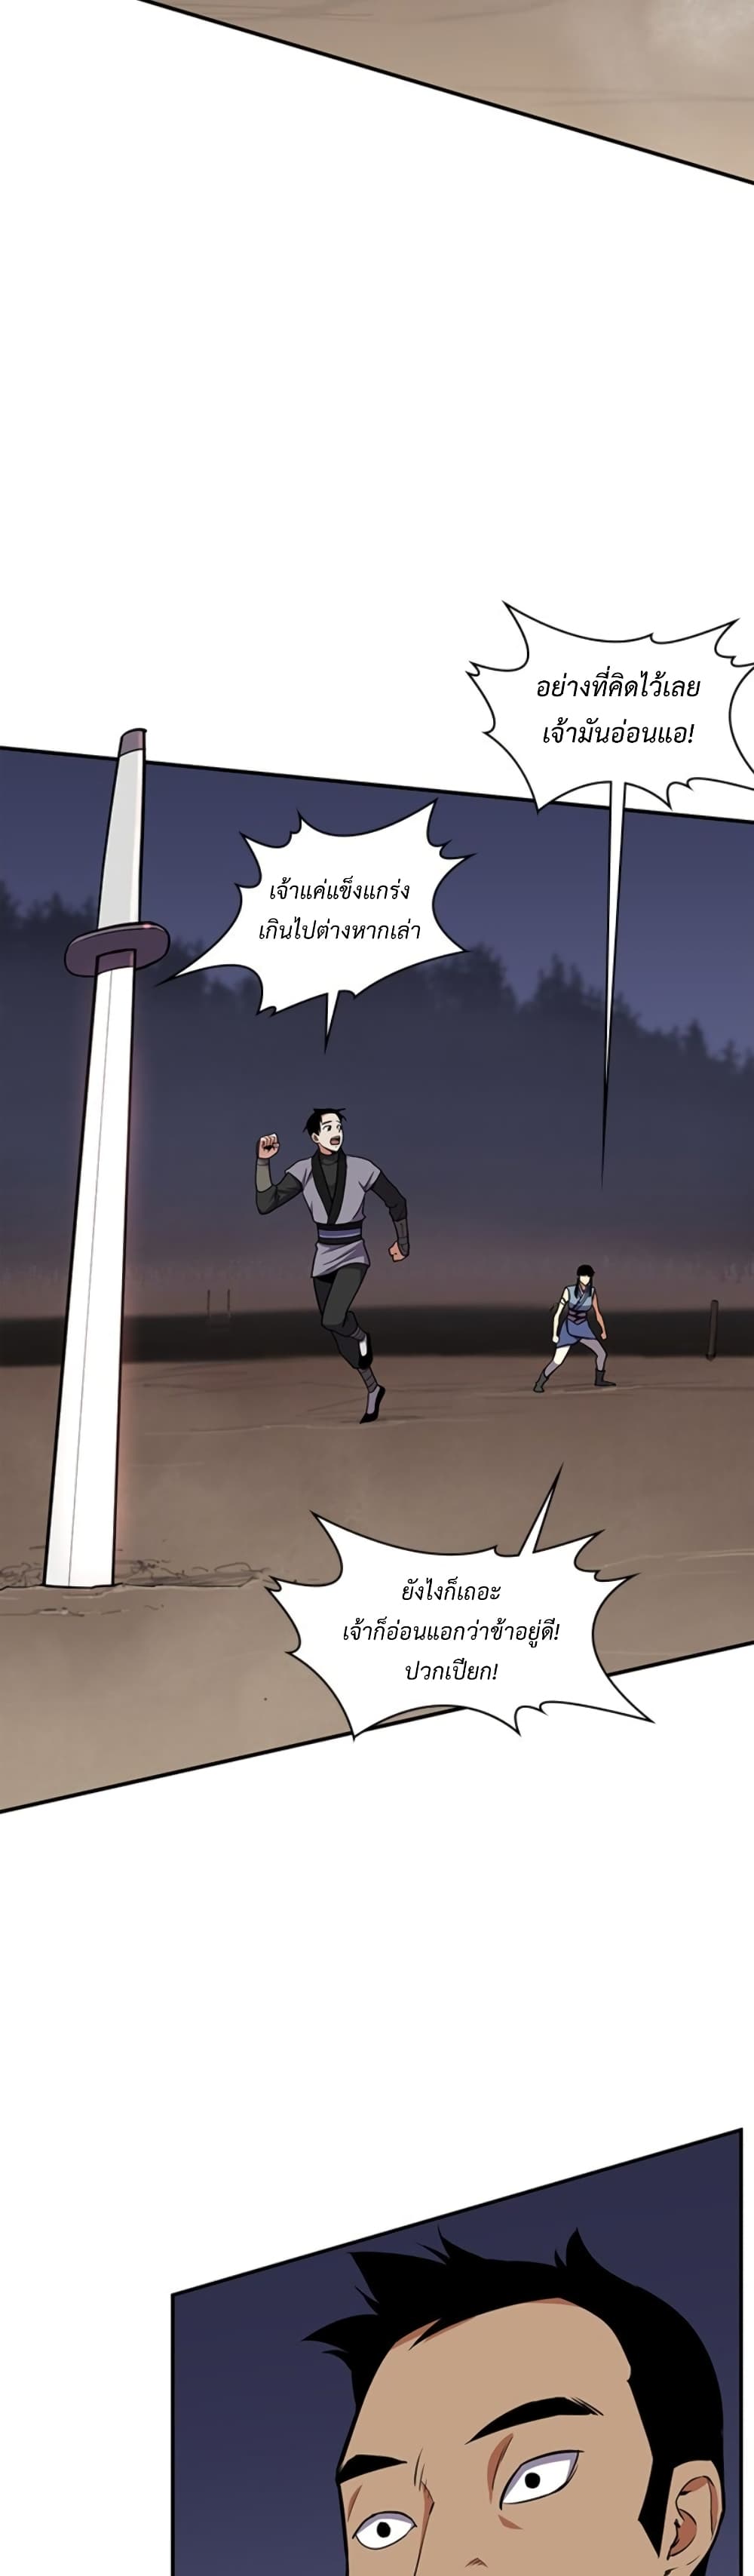 The Strongest Ever à¸à¸­à¸à¸à¸µà¹ 29 (28)